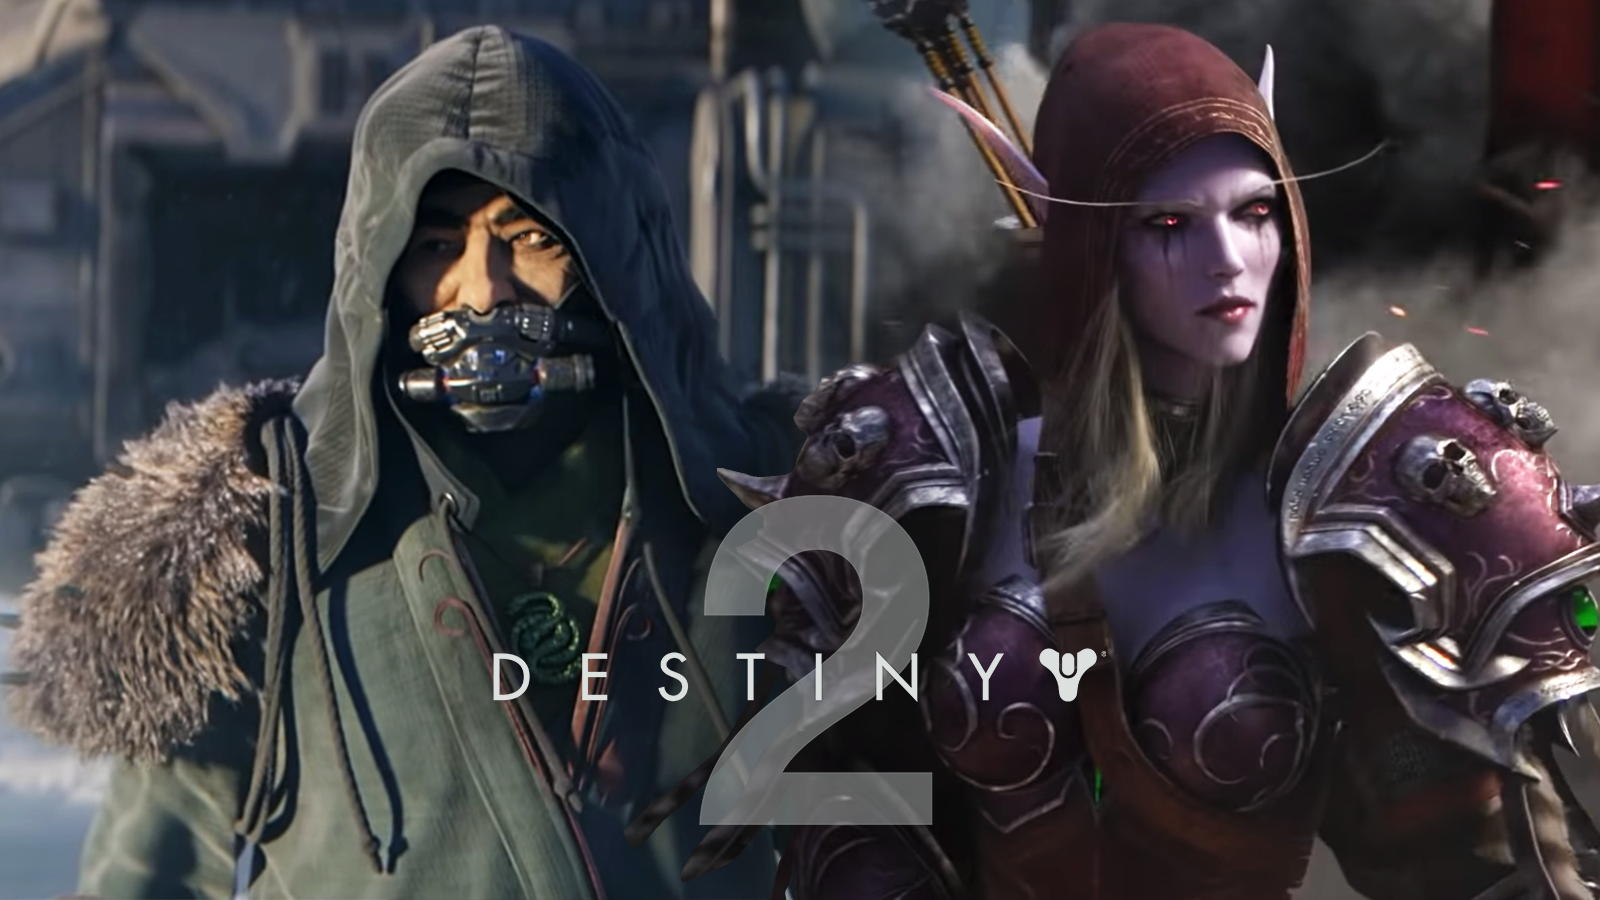 Destiny 2 may finally get proper World of Warcraft factions in Year 4